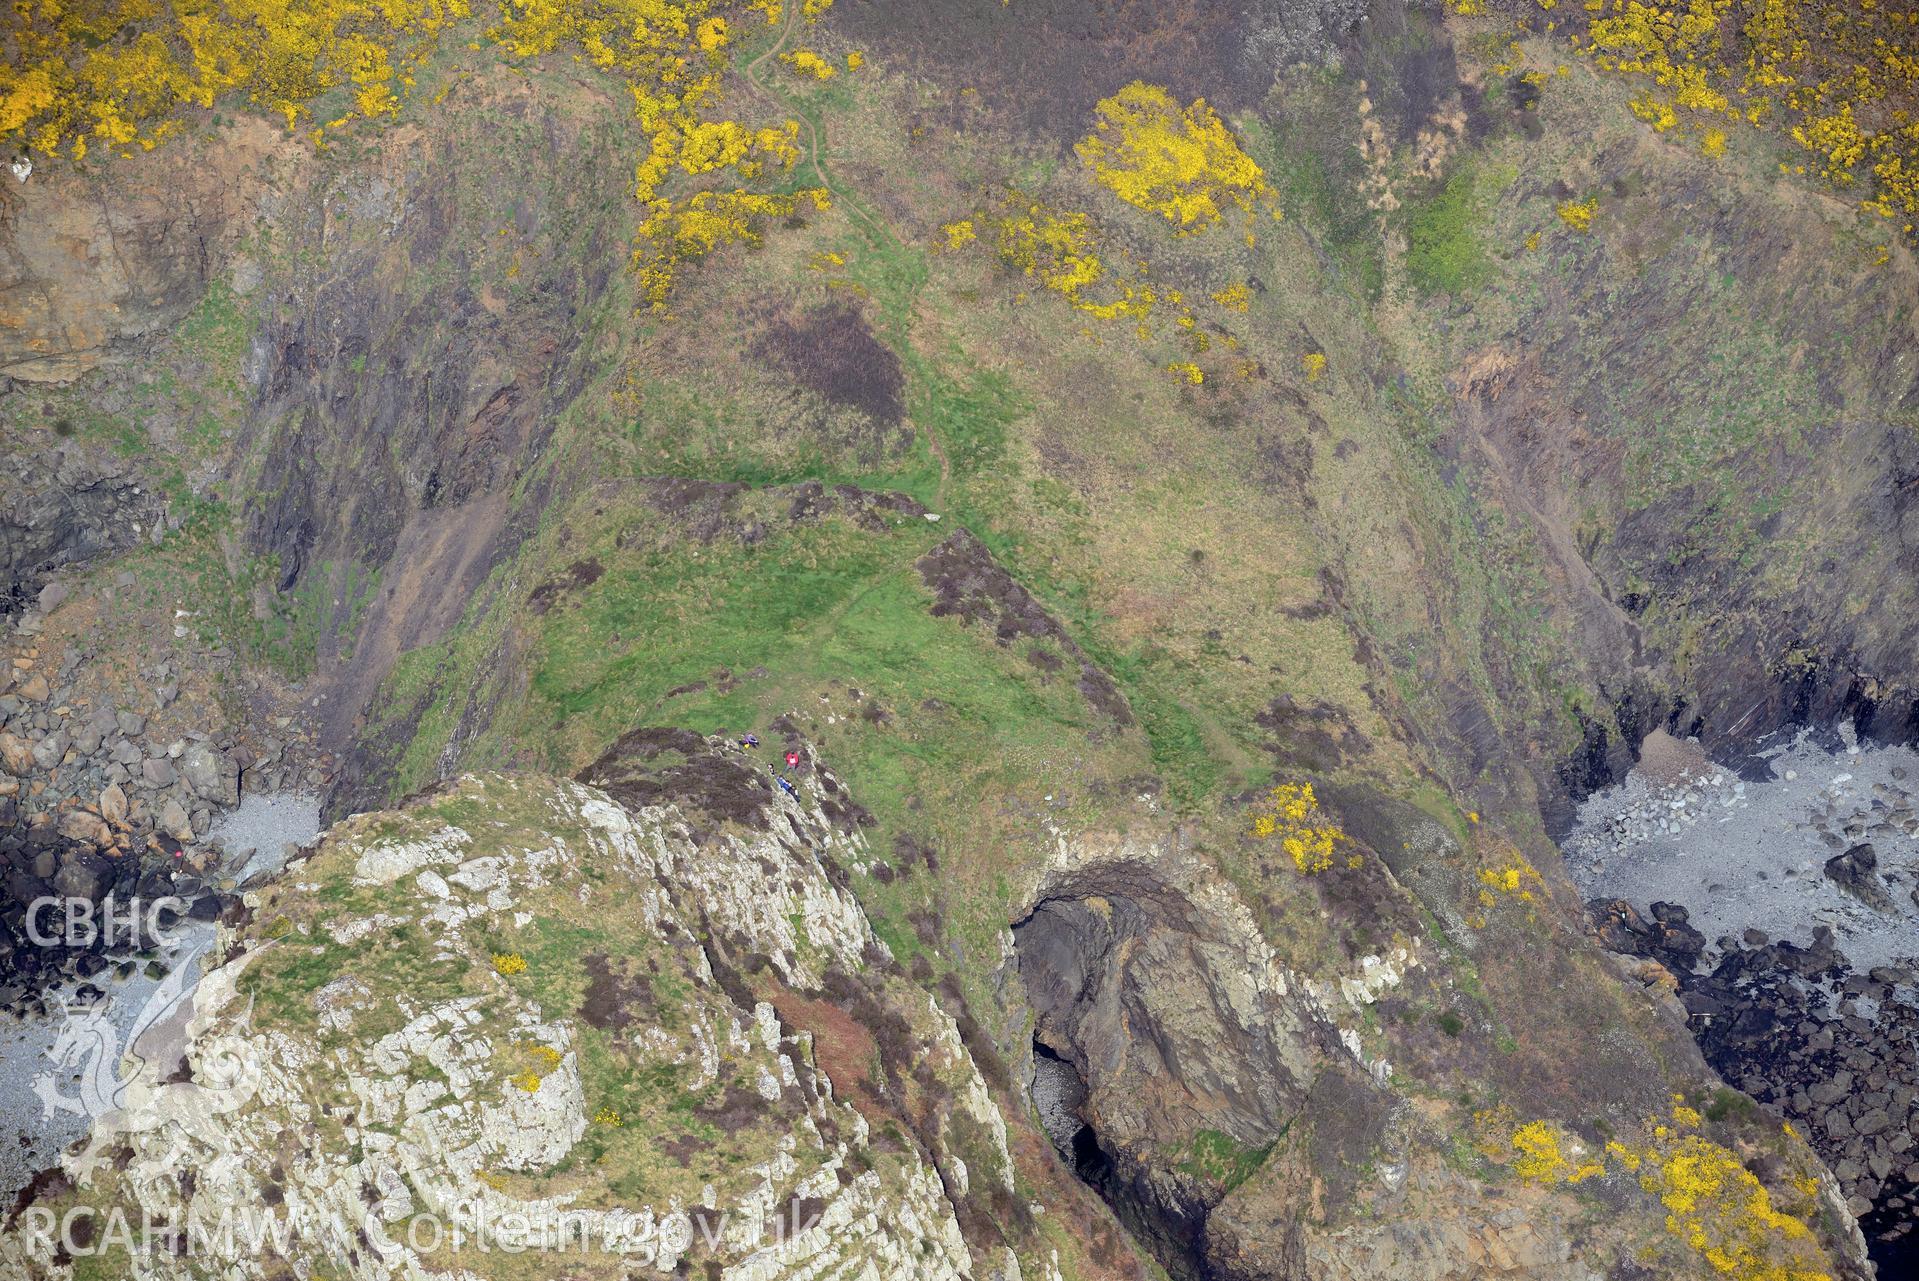 Aerial photography of Dinas Mawr taken on 27th March 2017. Baseline aerial reconnaissance survey for the CHERISH Project. ? Crown: CHERISH PROJECT 2017. Produced with EU funds through the Ireland Wales Co-operation Programme 2014-2020. All material made freely available through the Open Government Licence.